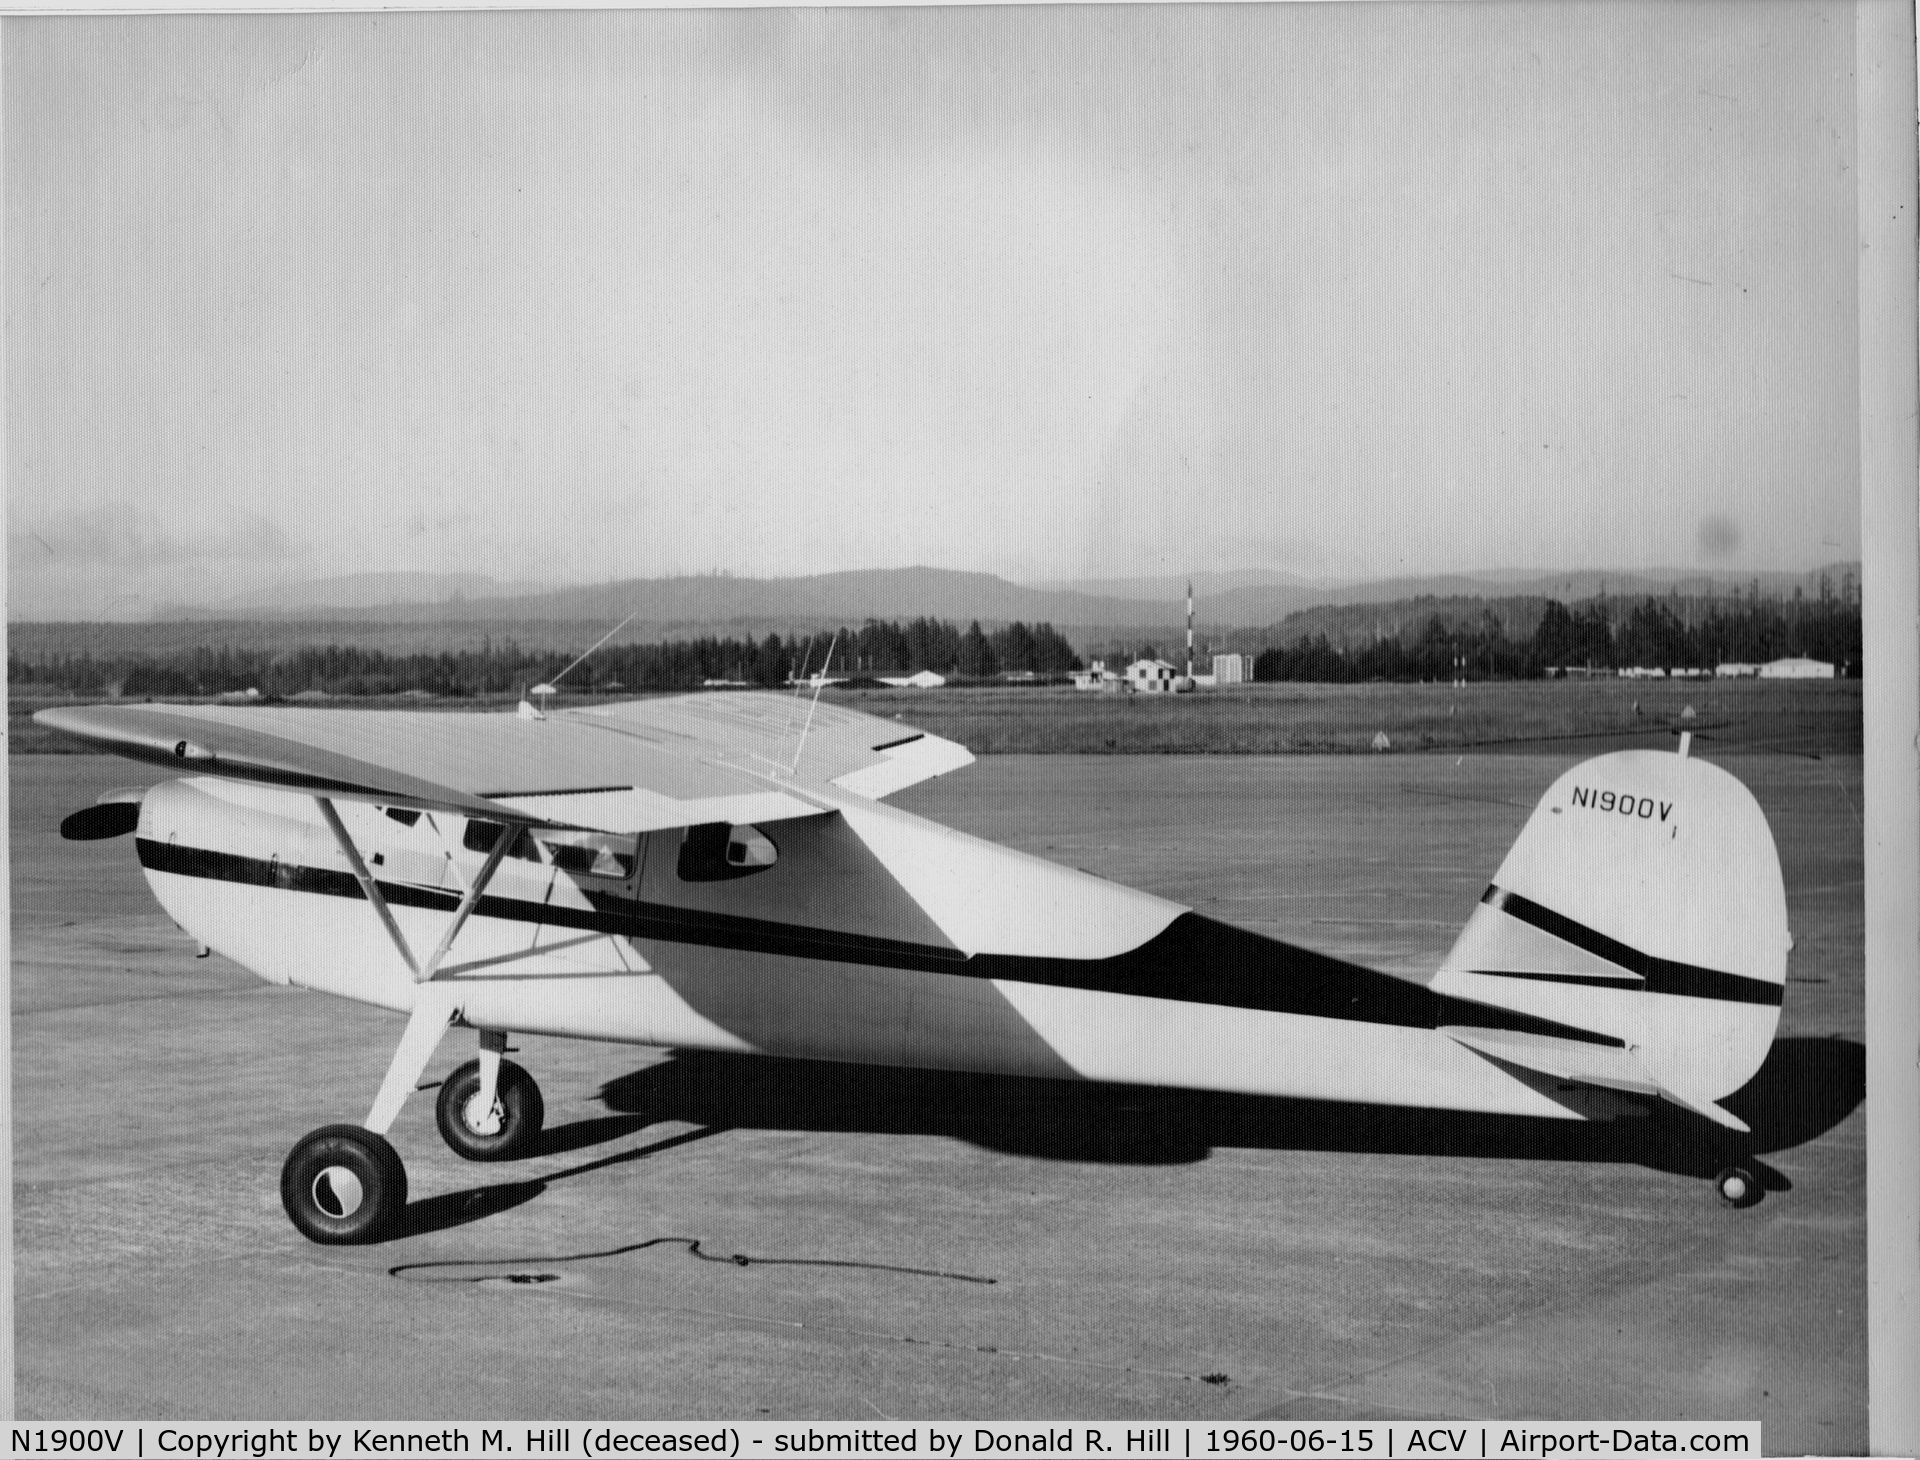 N1900V, 1947 Cessna 140 C/N 14091, Taken at Arcata/Eureka Airport (ACV) circa 1960; Jointly owned then by Kenneth M. Hill and James J. Hill